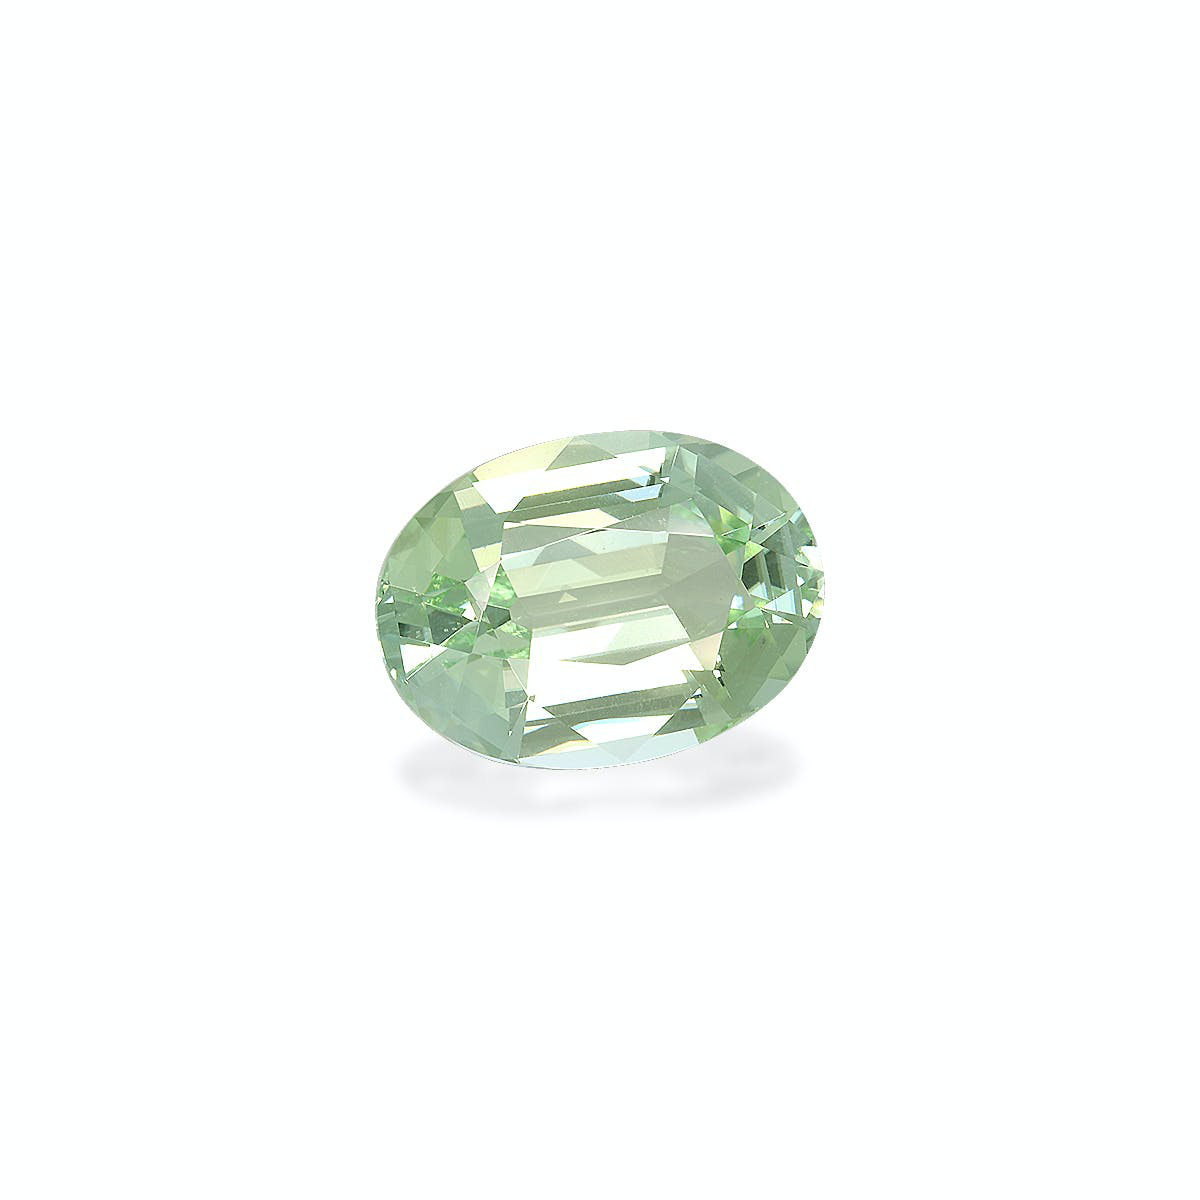 Picture of Mist Green Tourmaline 14.32ct (TG1531)